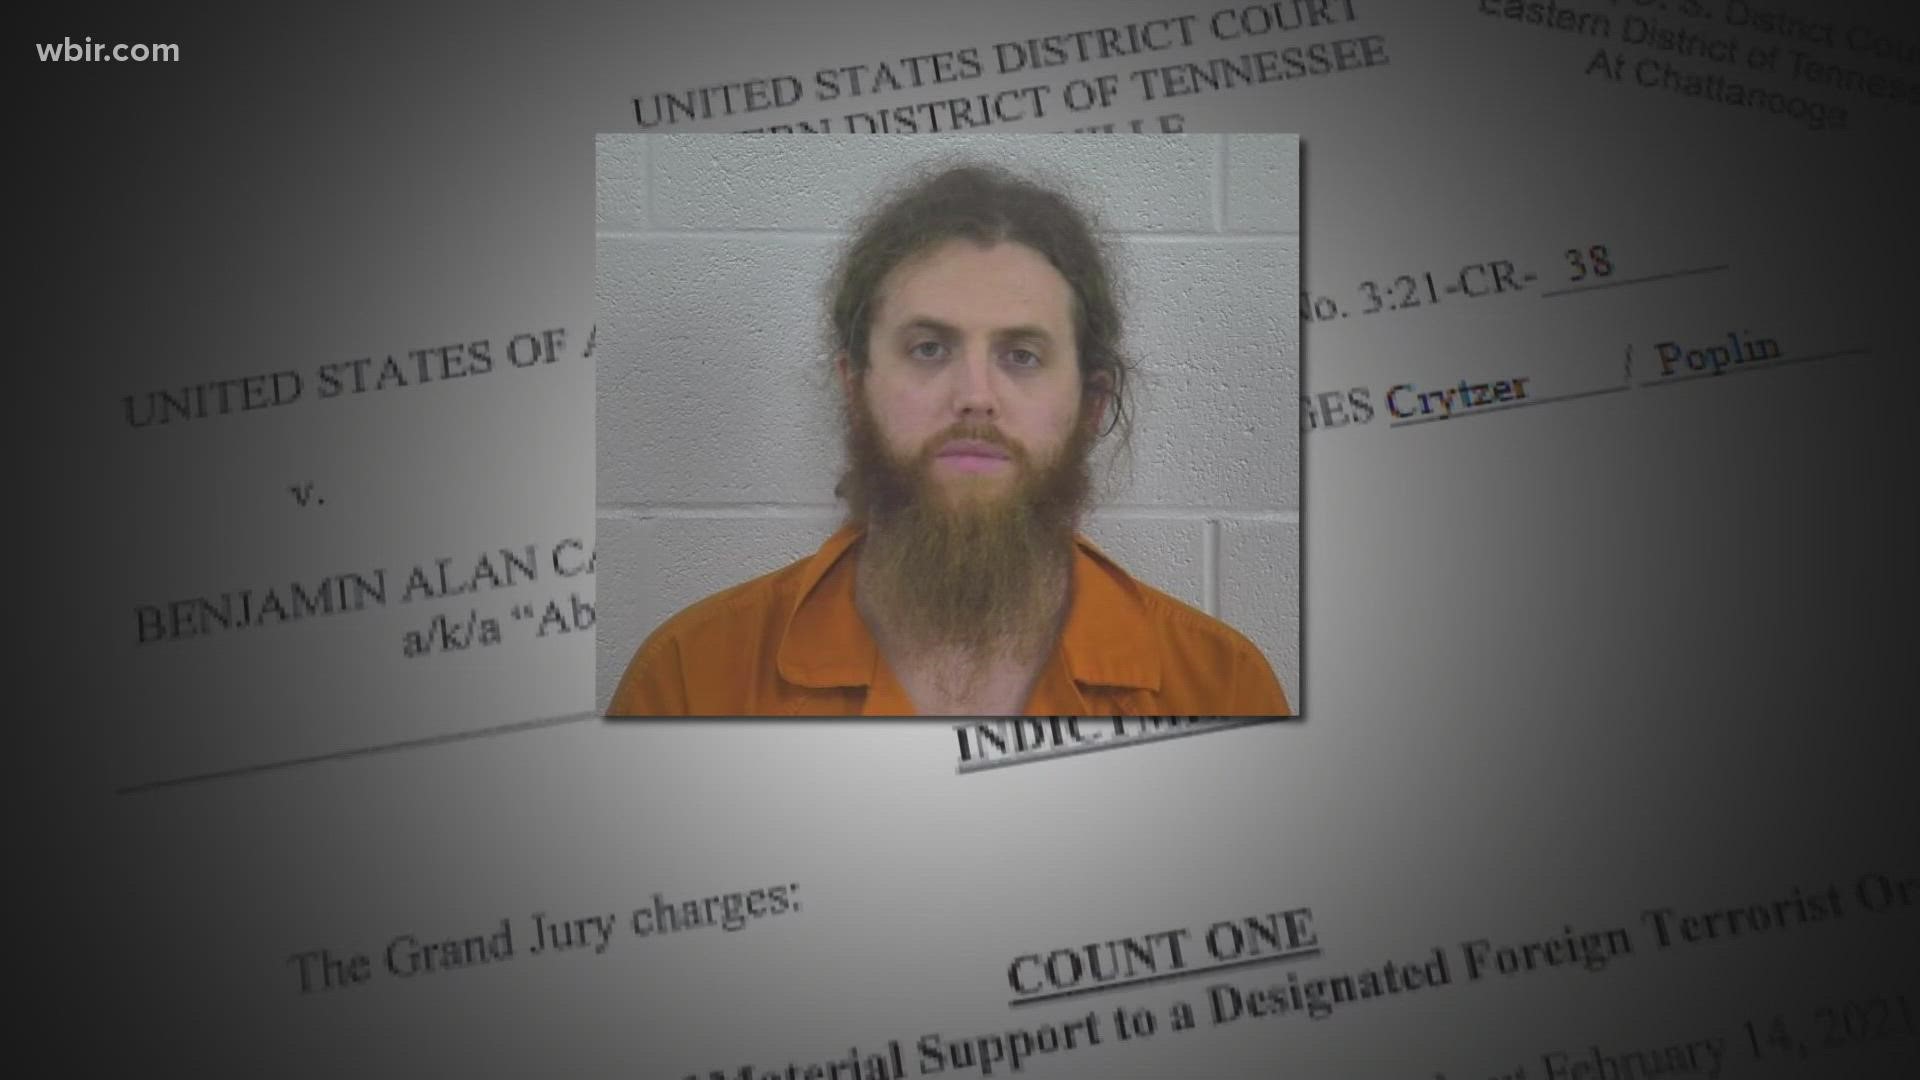 In a low-resolution video interview from the Knox County Jail, Benjamin Carpenter said he plans to beat the charges at his federal trial this summer.